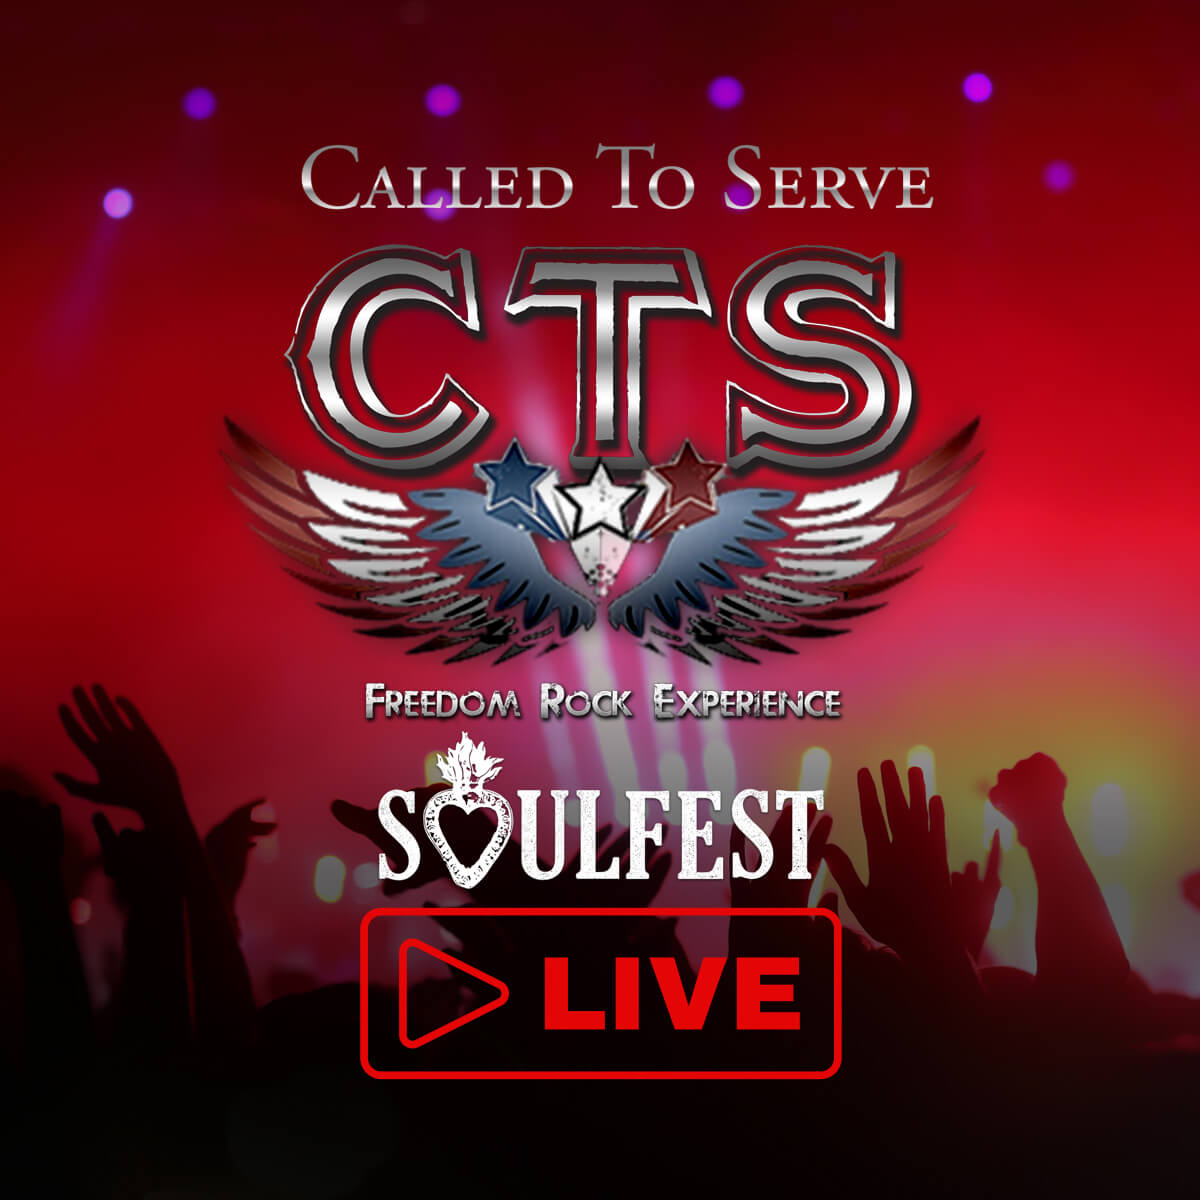 CTS Live Stream Soulfest 2021 - Called To Serve